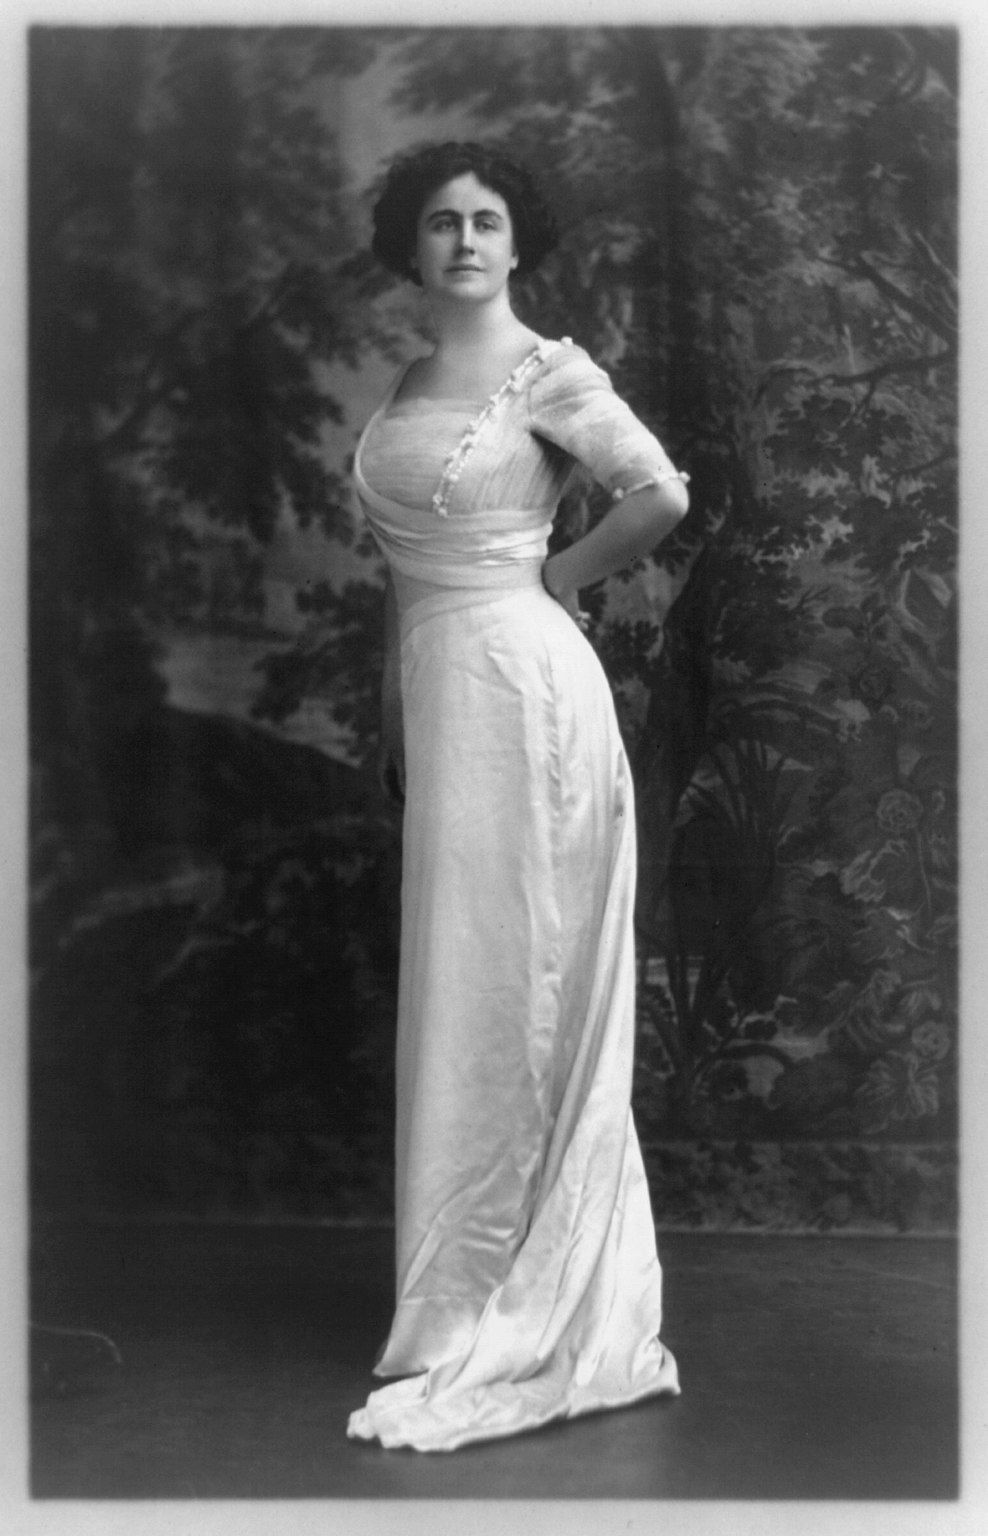 Edith in 1913, before her marriage to Woodrow